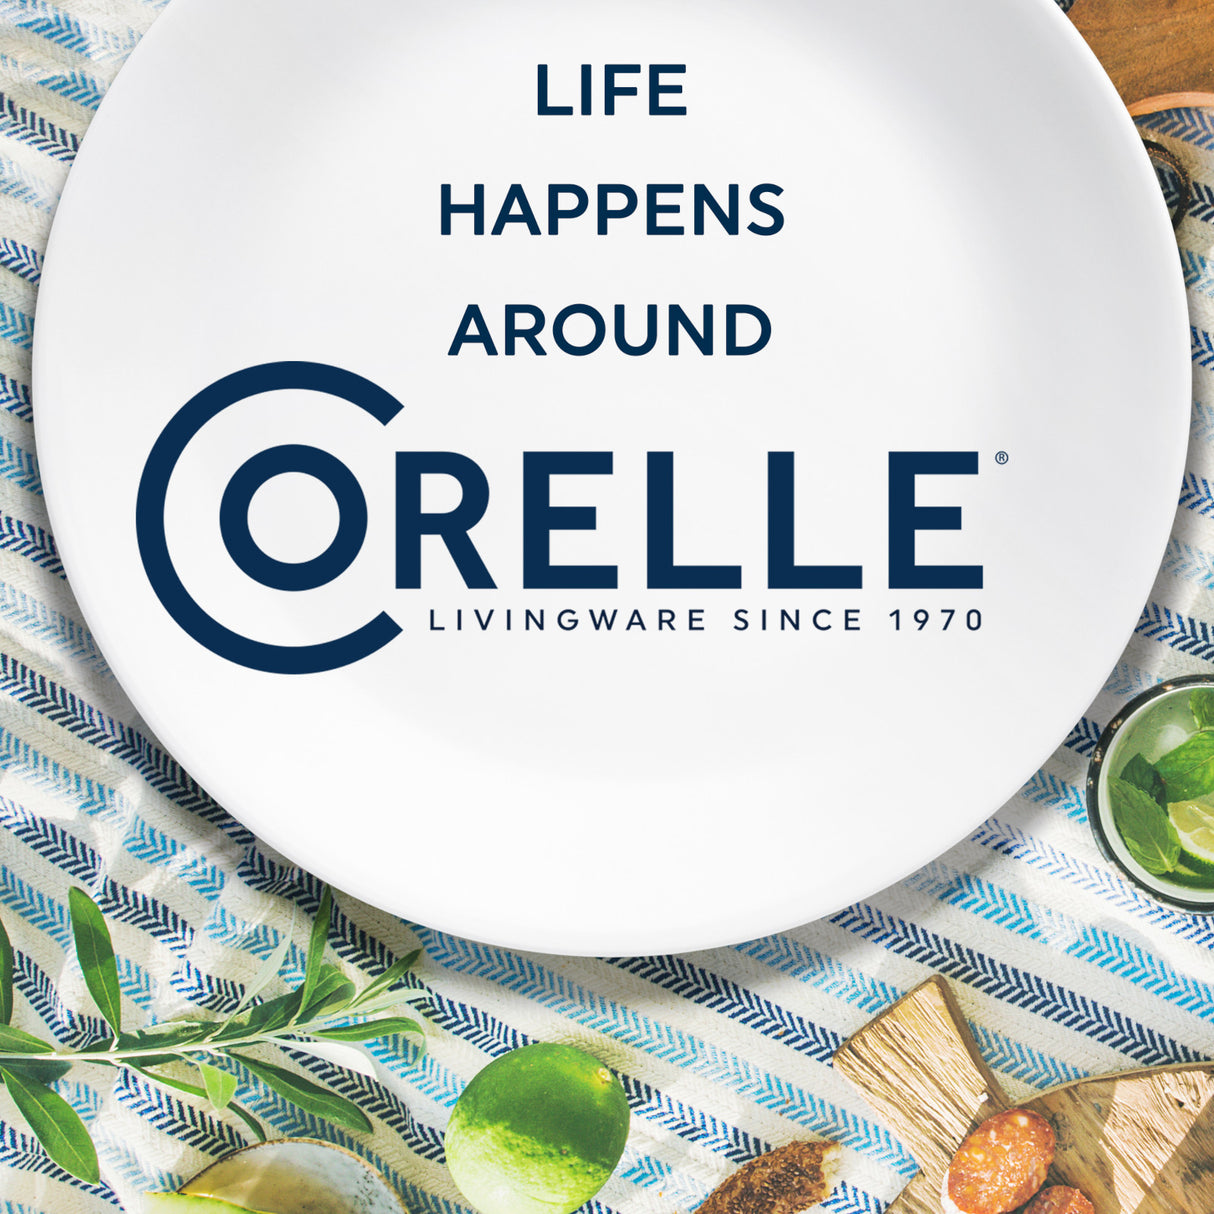 text that says life happens around Corelle ivingware since 1970